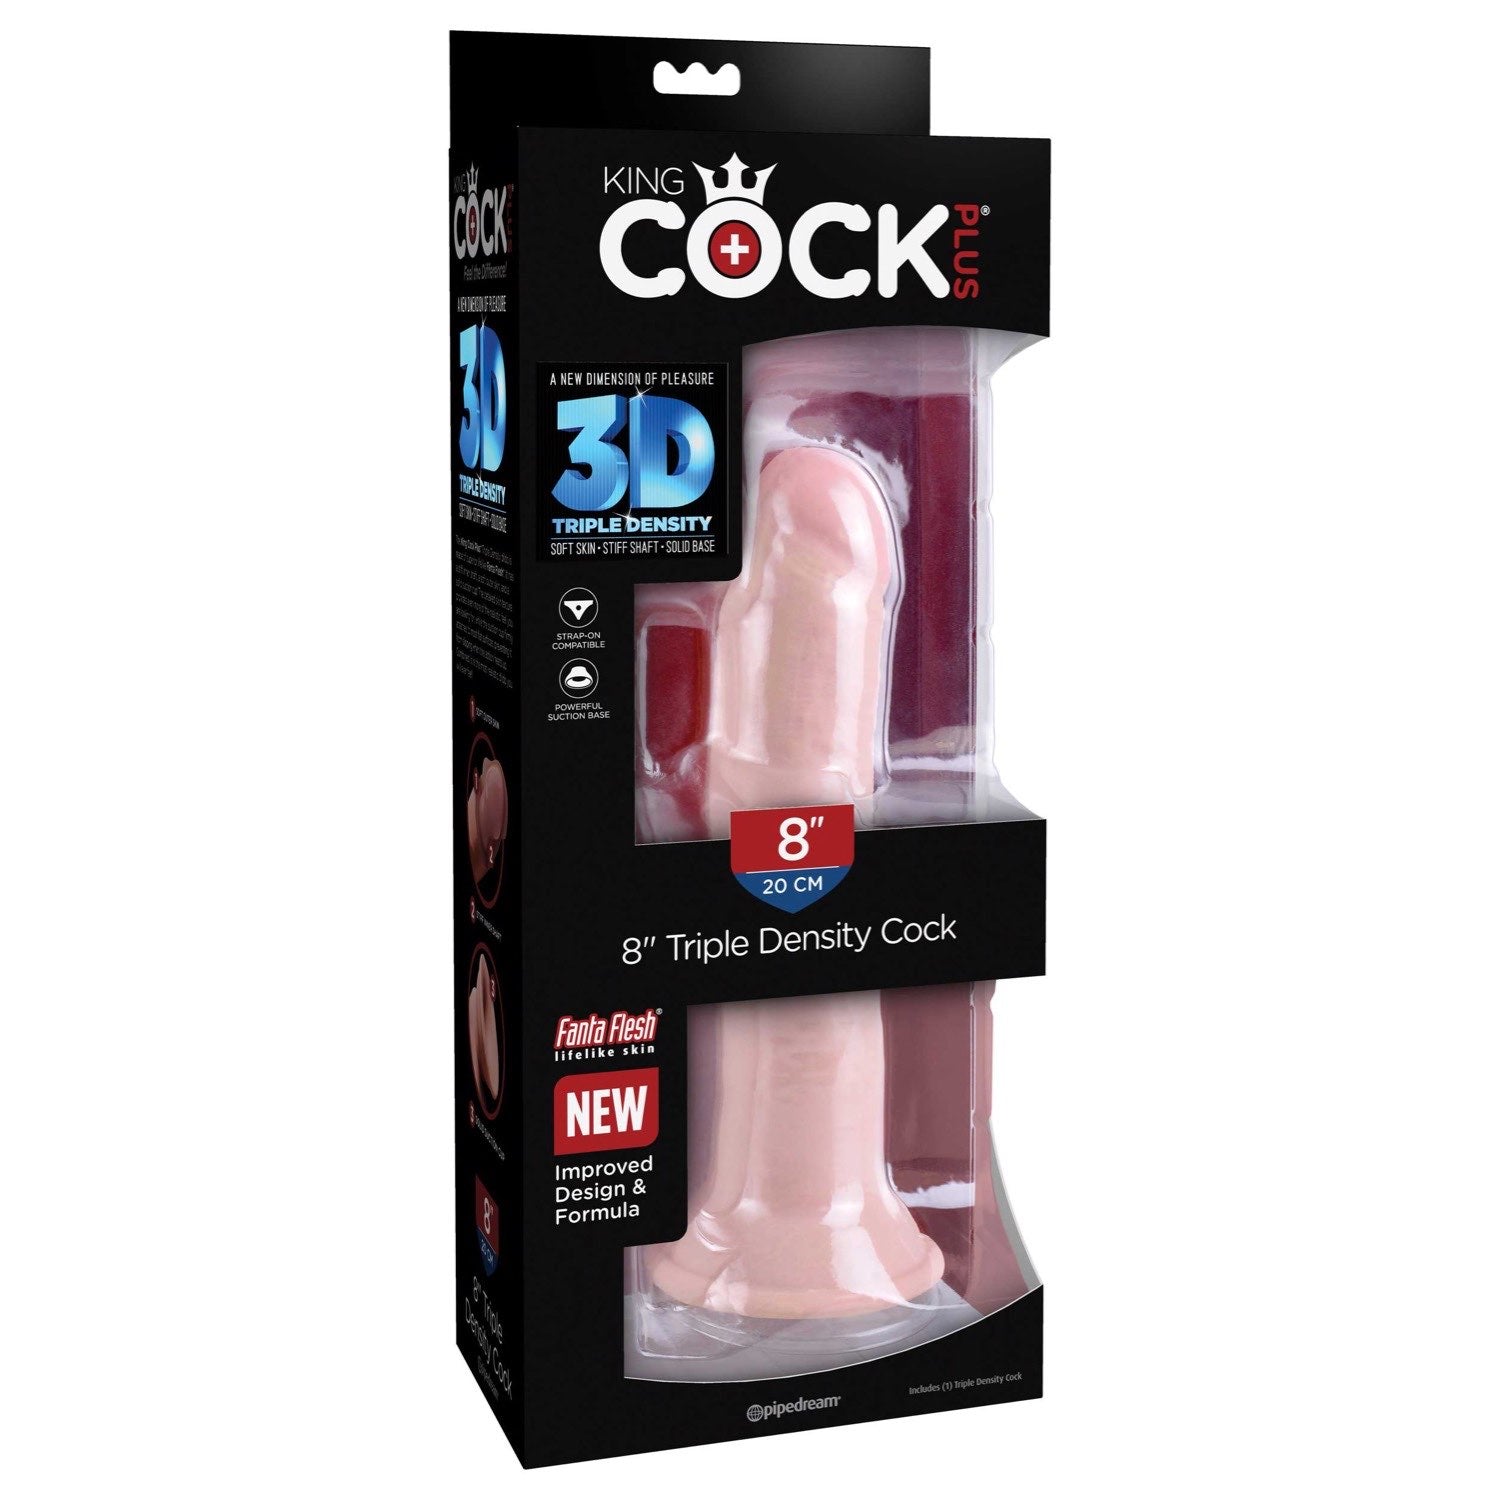 King Cock Plus 8&quot; Triple Density Cock - Flesh 20.3 cm Dong by Pipedream